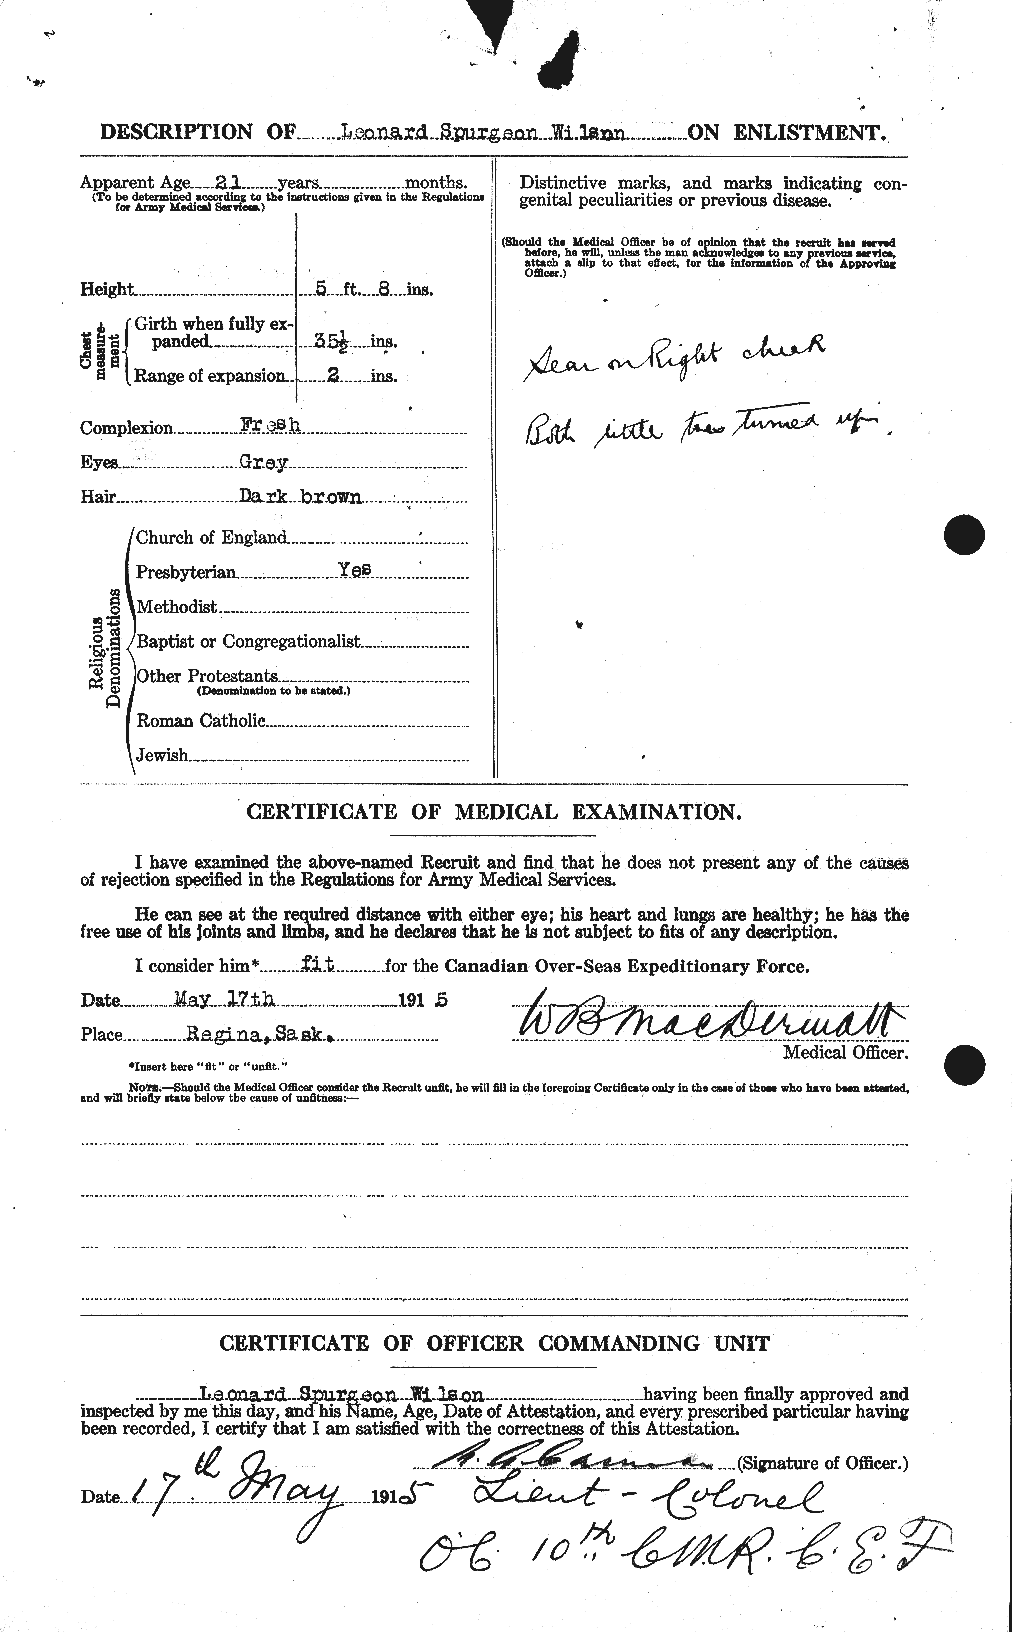 Personnel Records of the First World War - CEF 678641b